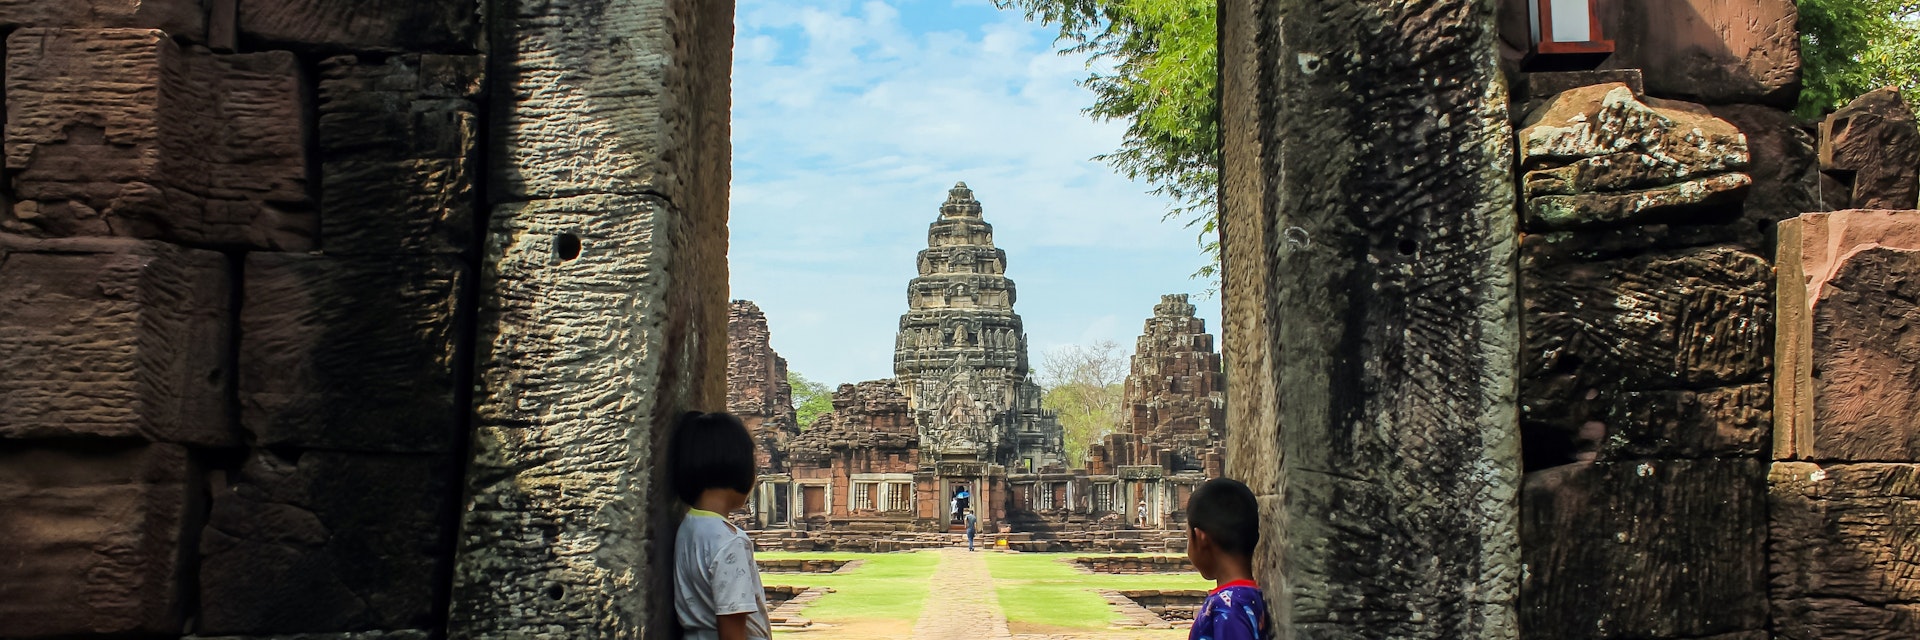 Phimai Historical Park, located in the district Phimai , Nakhon Ratchasima province.